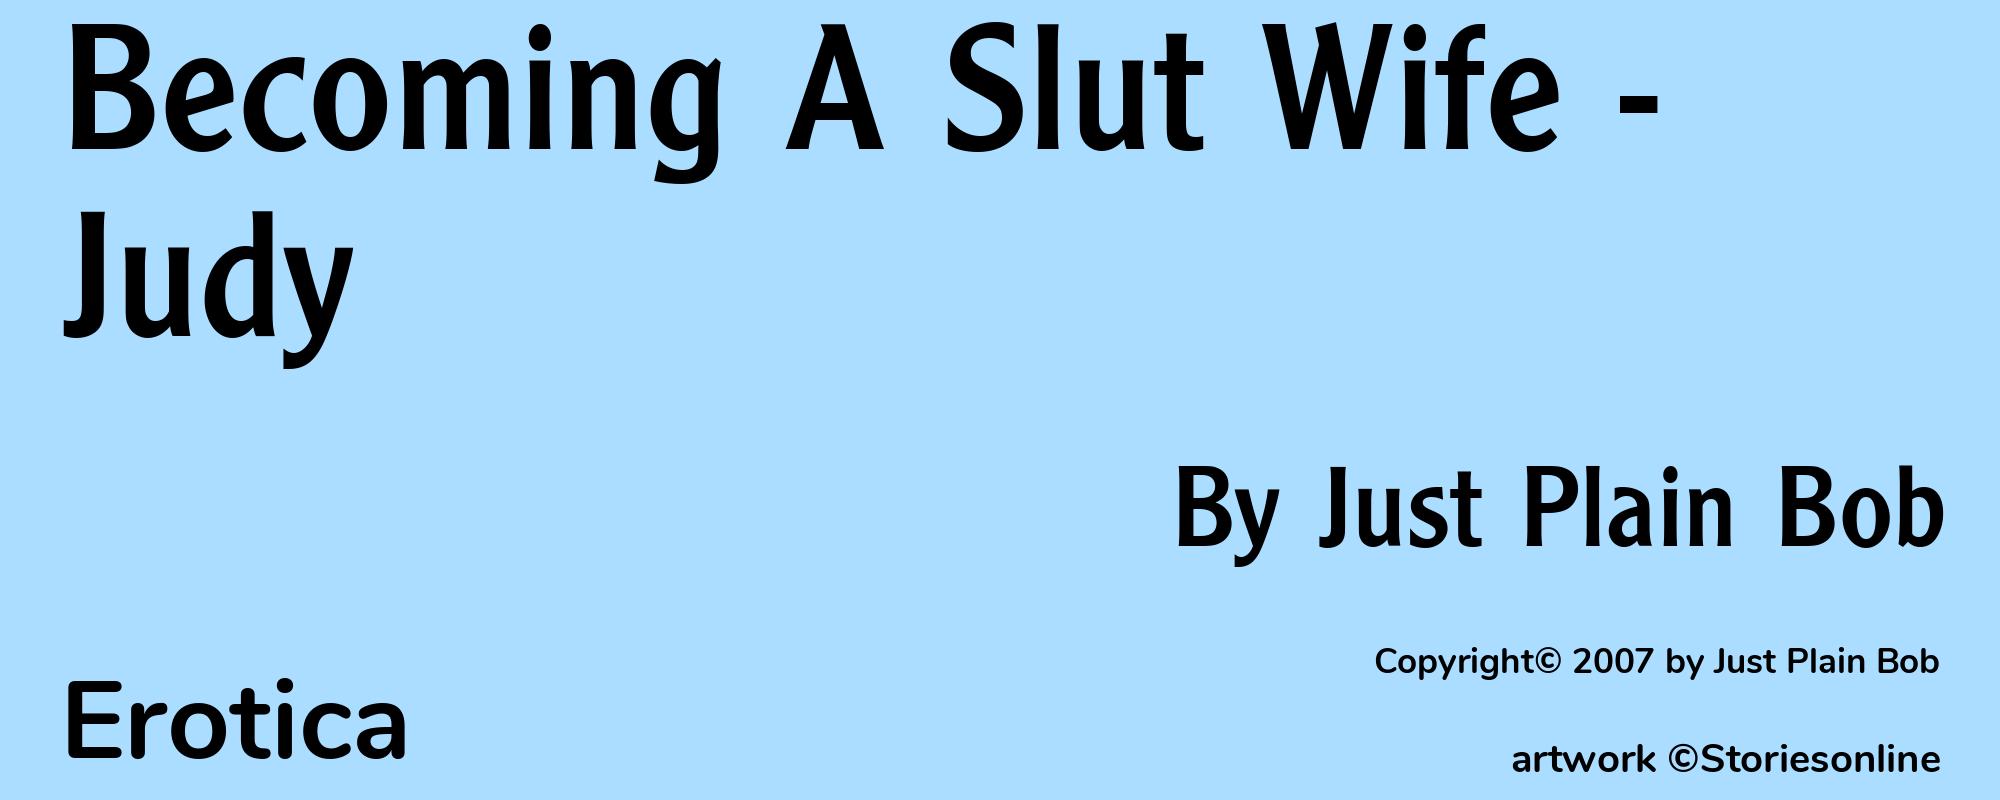 Becoming A Slut Wife - Judy - Cover